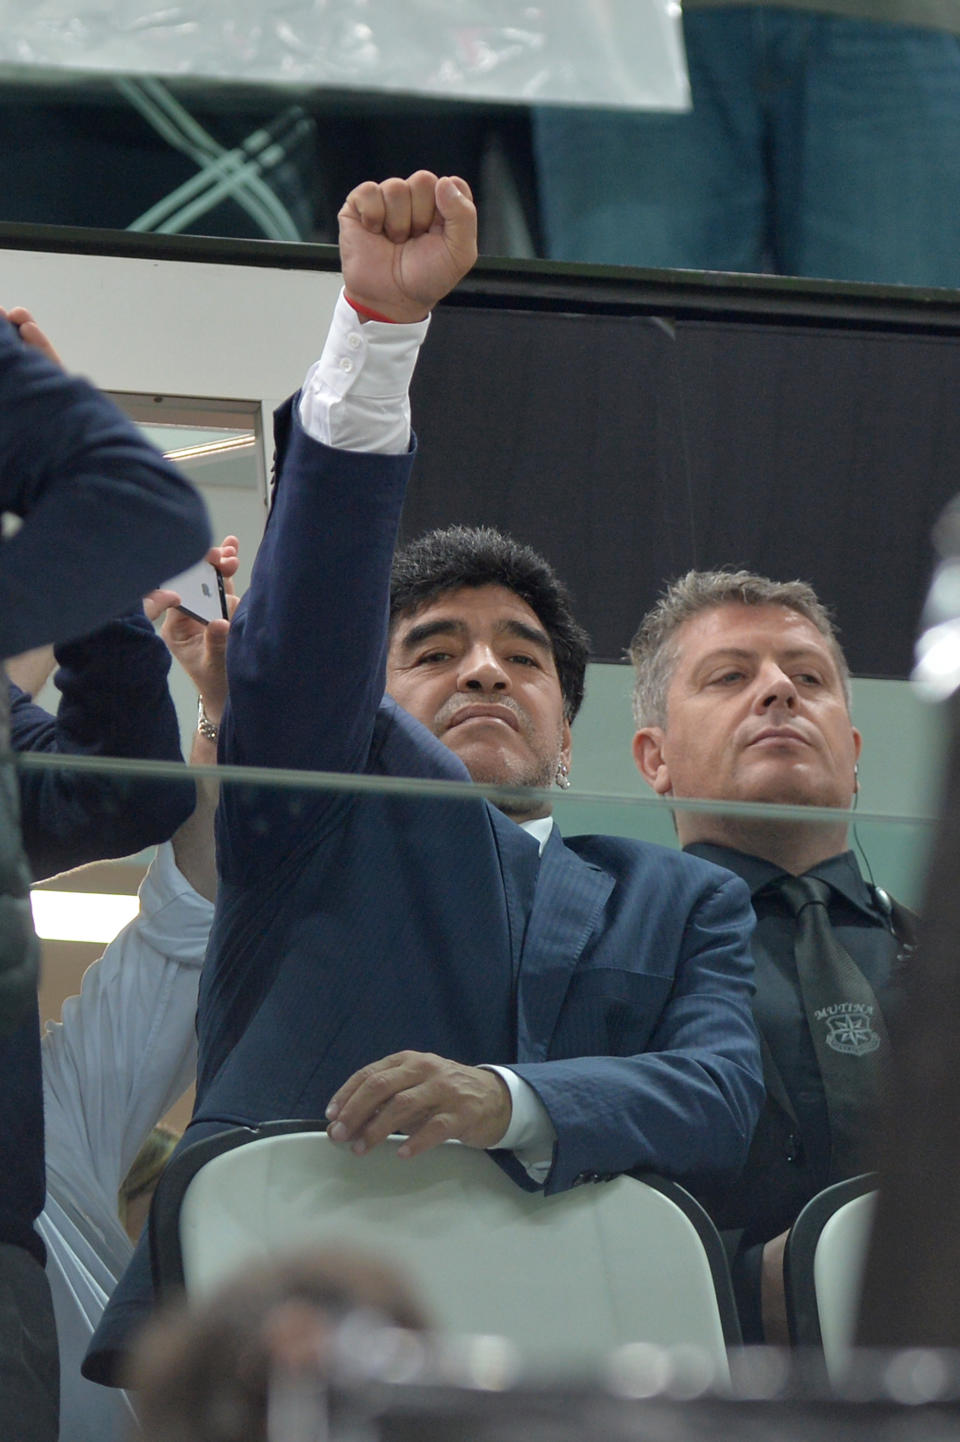 Former Argentinian soccer star Diego Armando Maradona lifts his fist from the stands during the Europa League semifinal second leg soccer match between Juventus and Benfica at the Juventus stadium, in Turin, Italy, Thursday, May 1, 2014. (AP Photo/ Massimo Pinca)